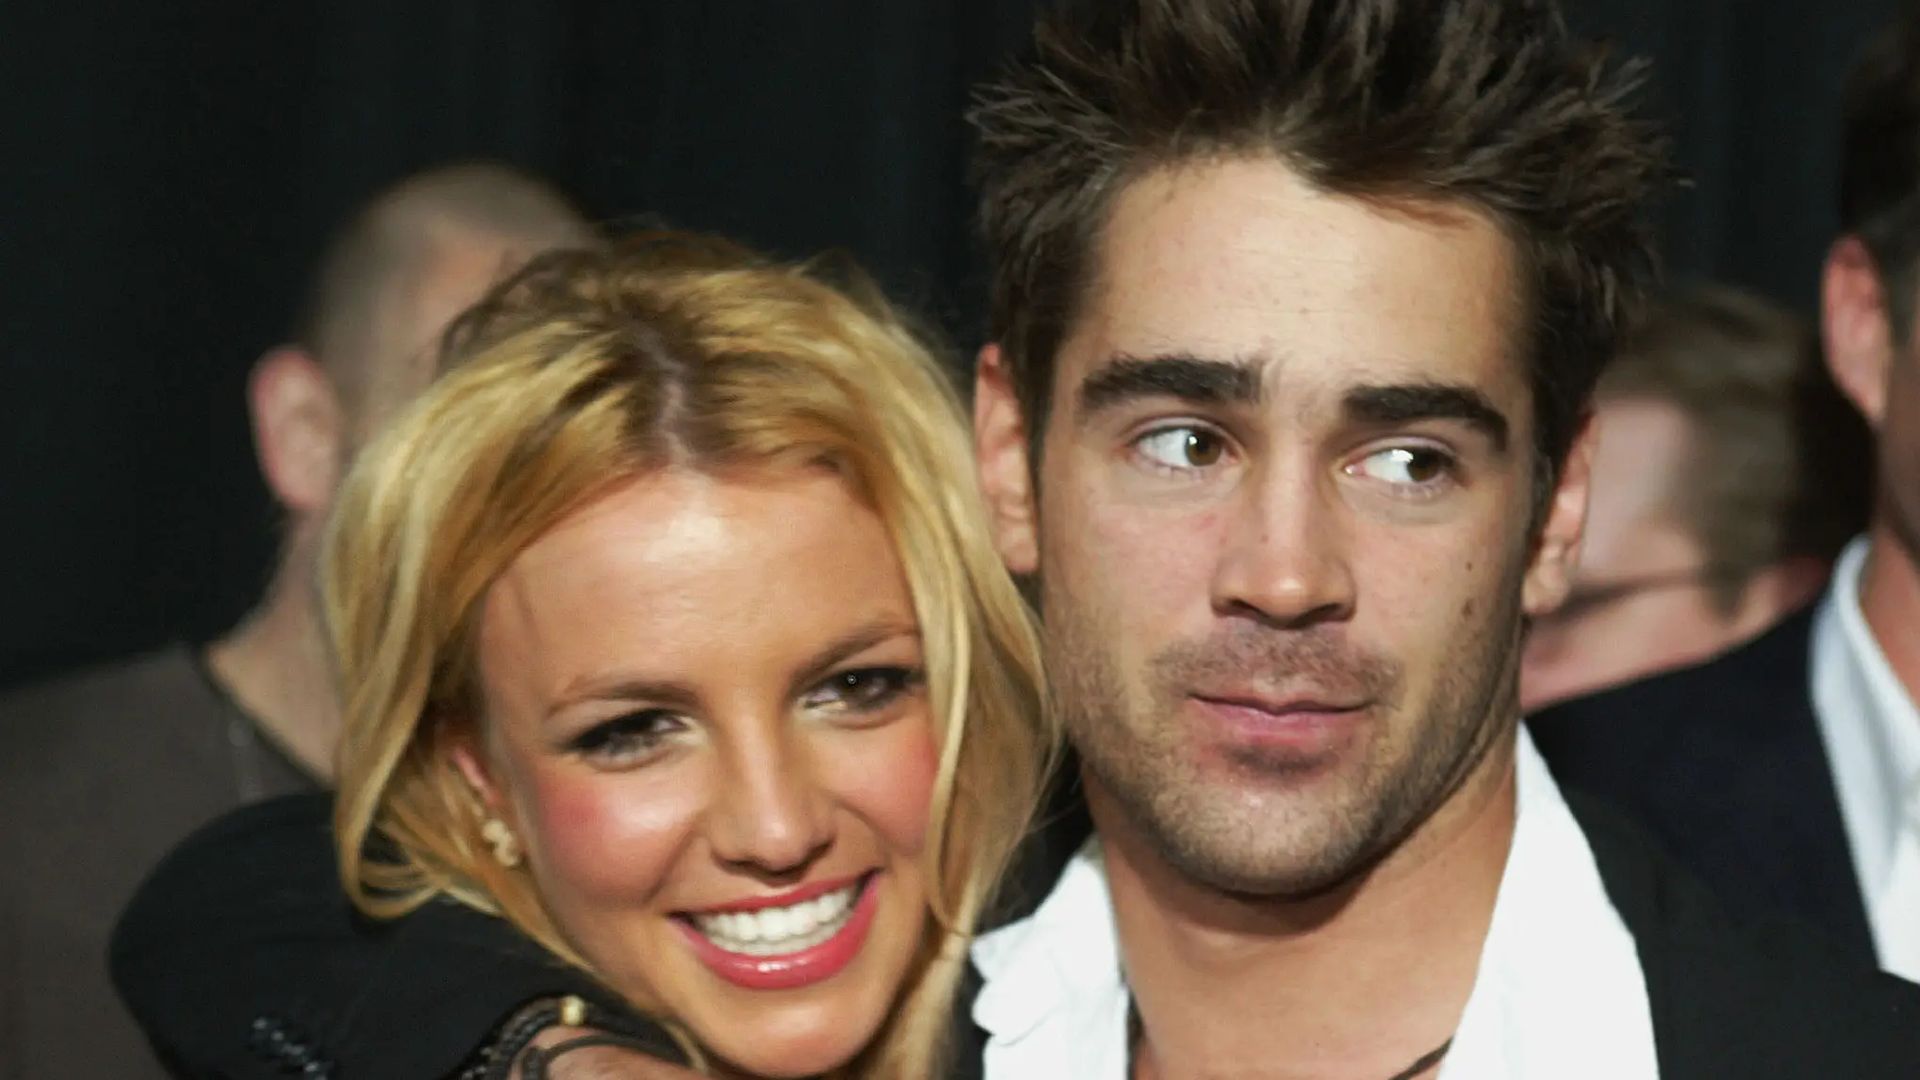 Britney Spears reveals 'passionate' tryst with Colin Farrell following split from Justin Timberlake